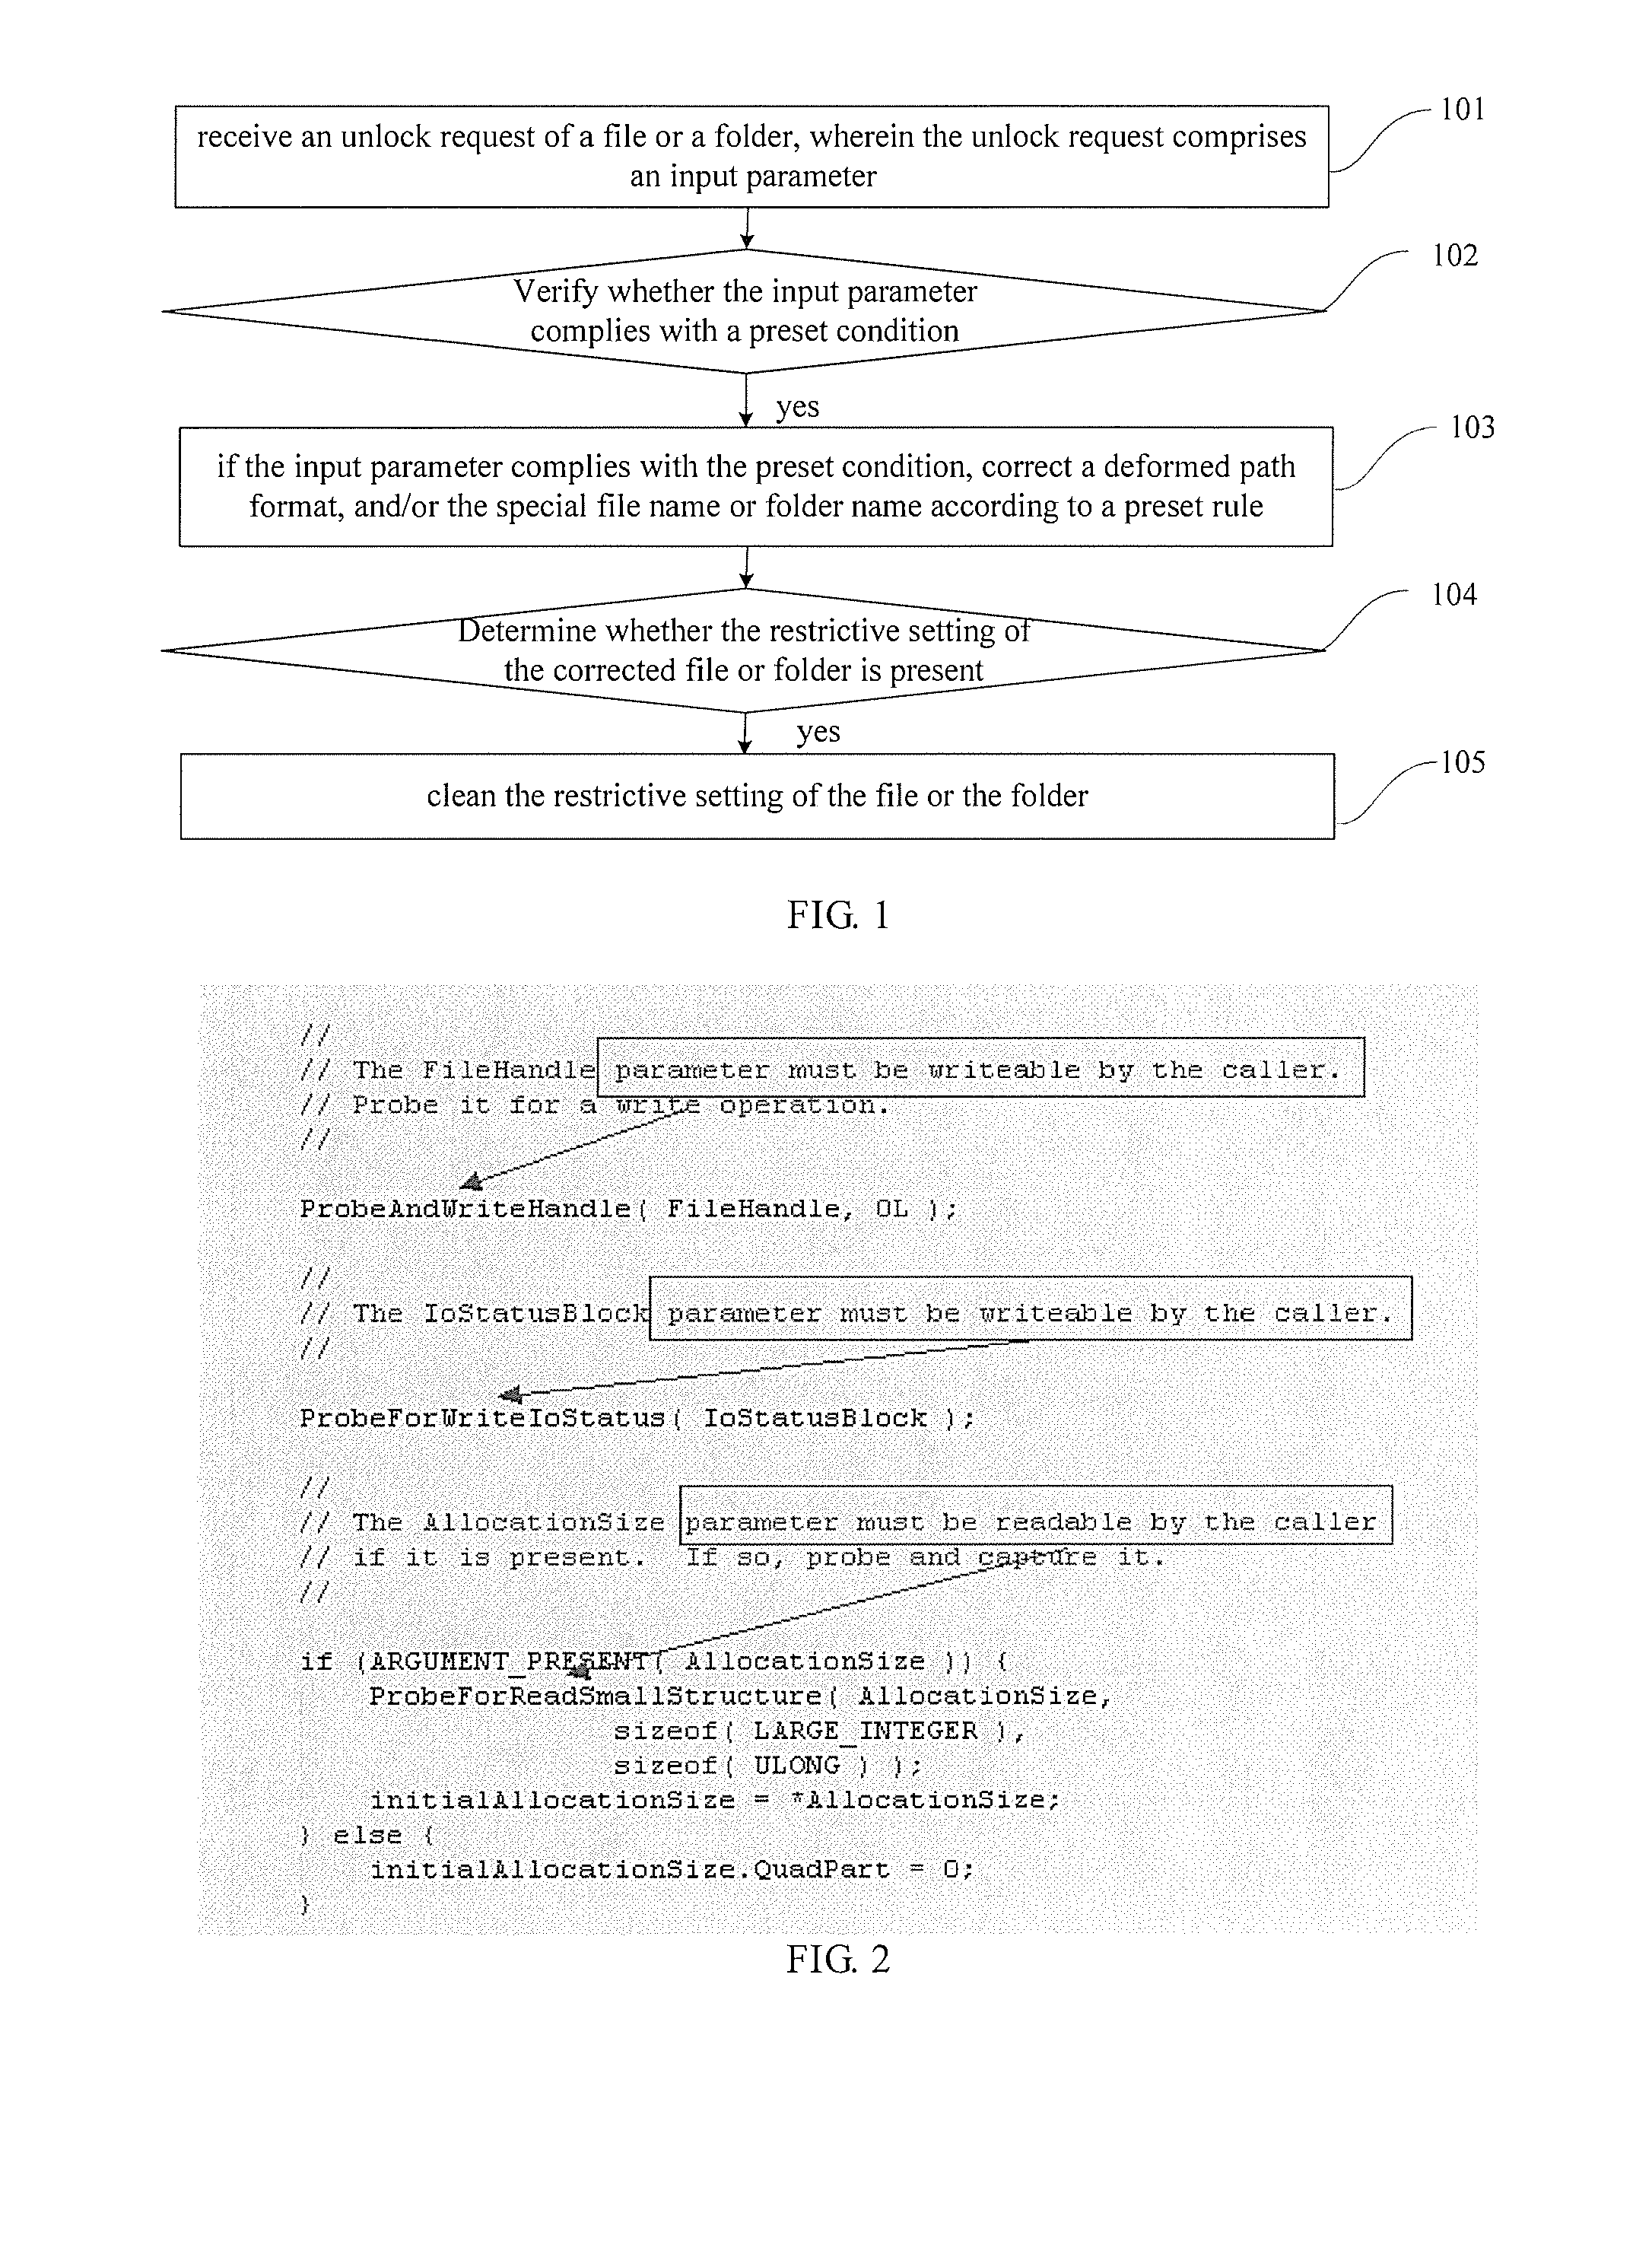 Method and system for unlocking and deleting file and folder